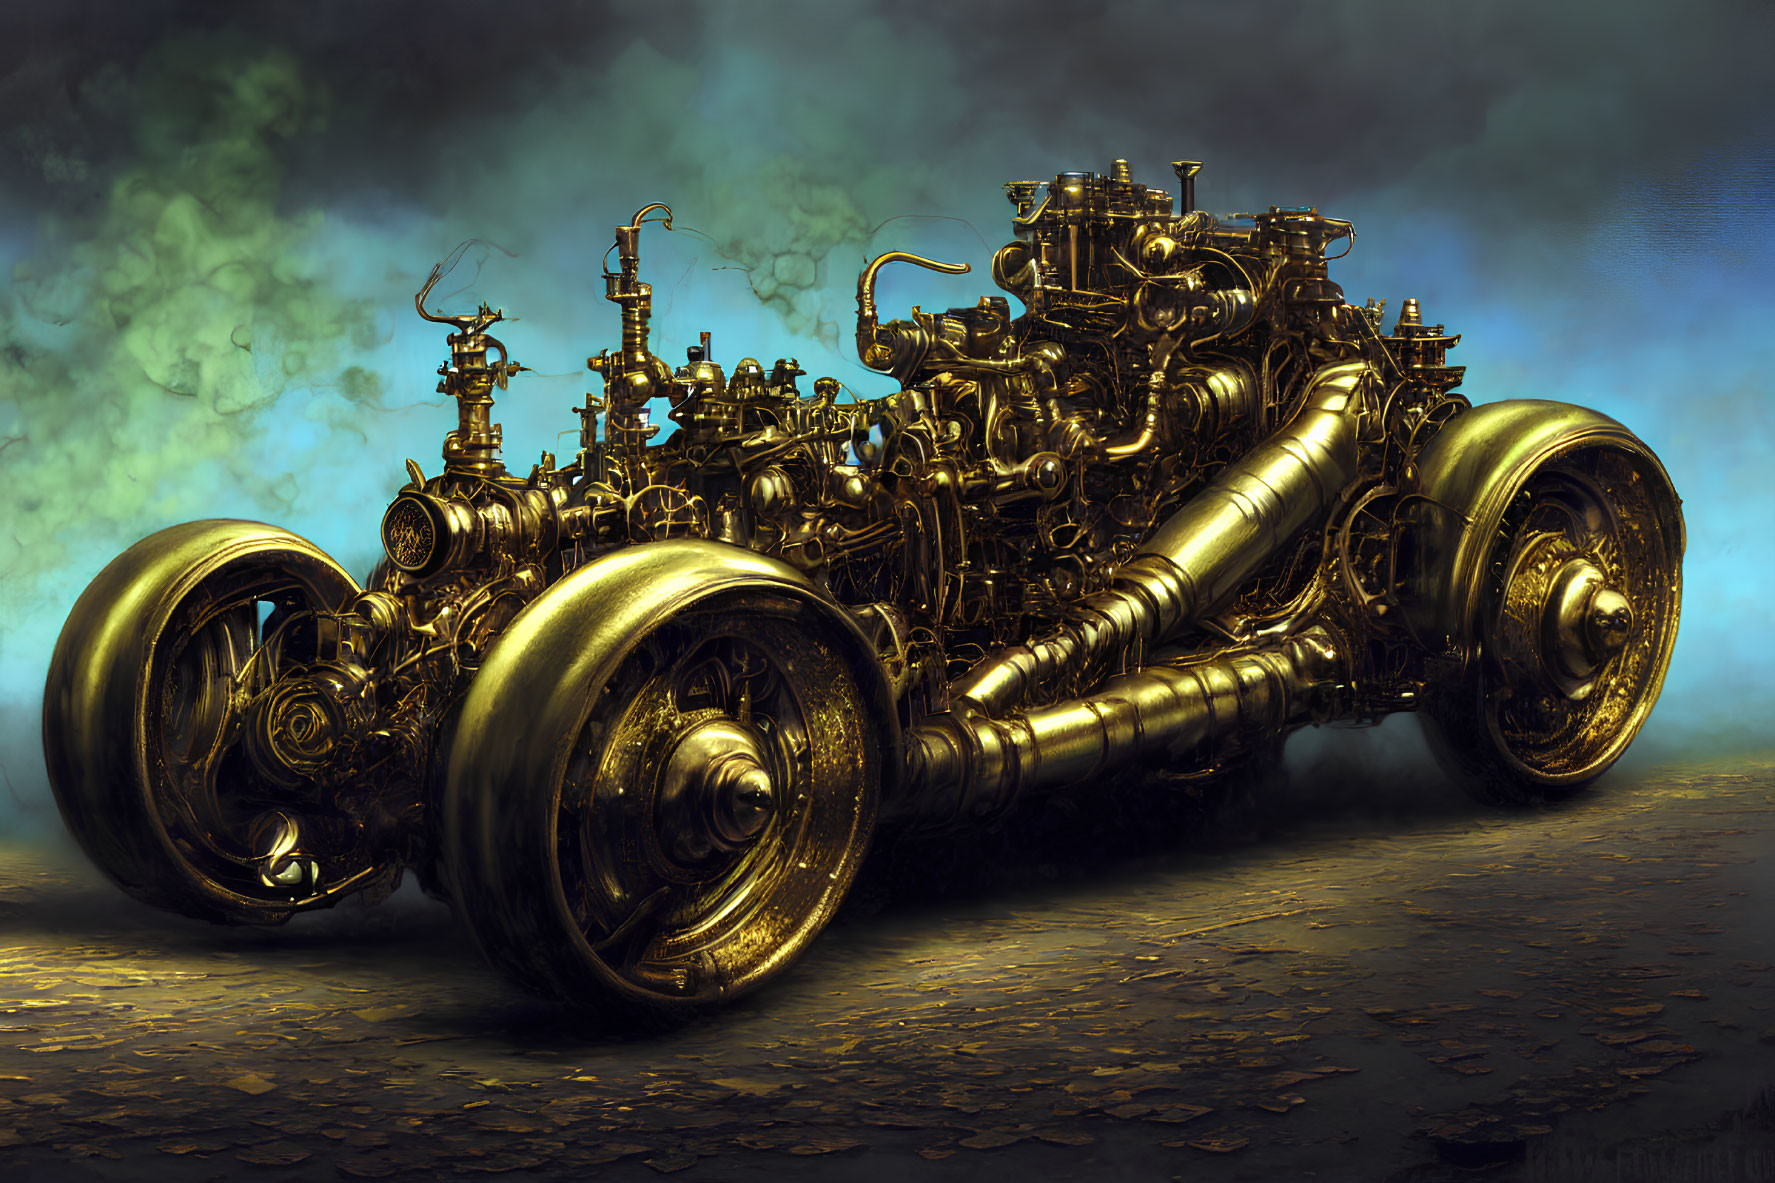 Steampunk-inspired vehicle with gears and pipes on cobblestone surface